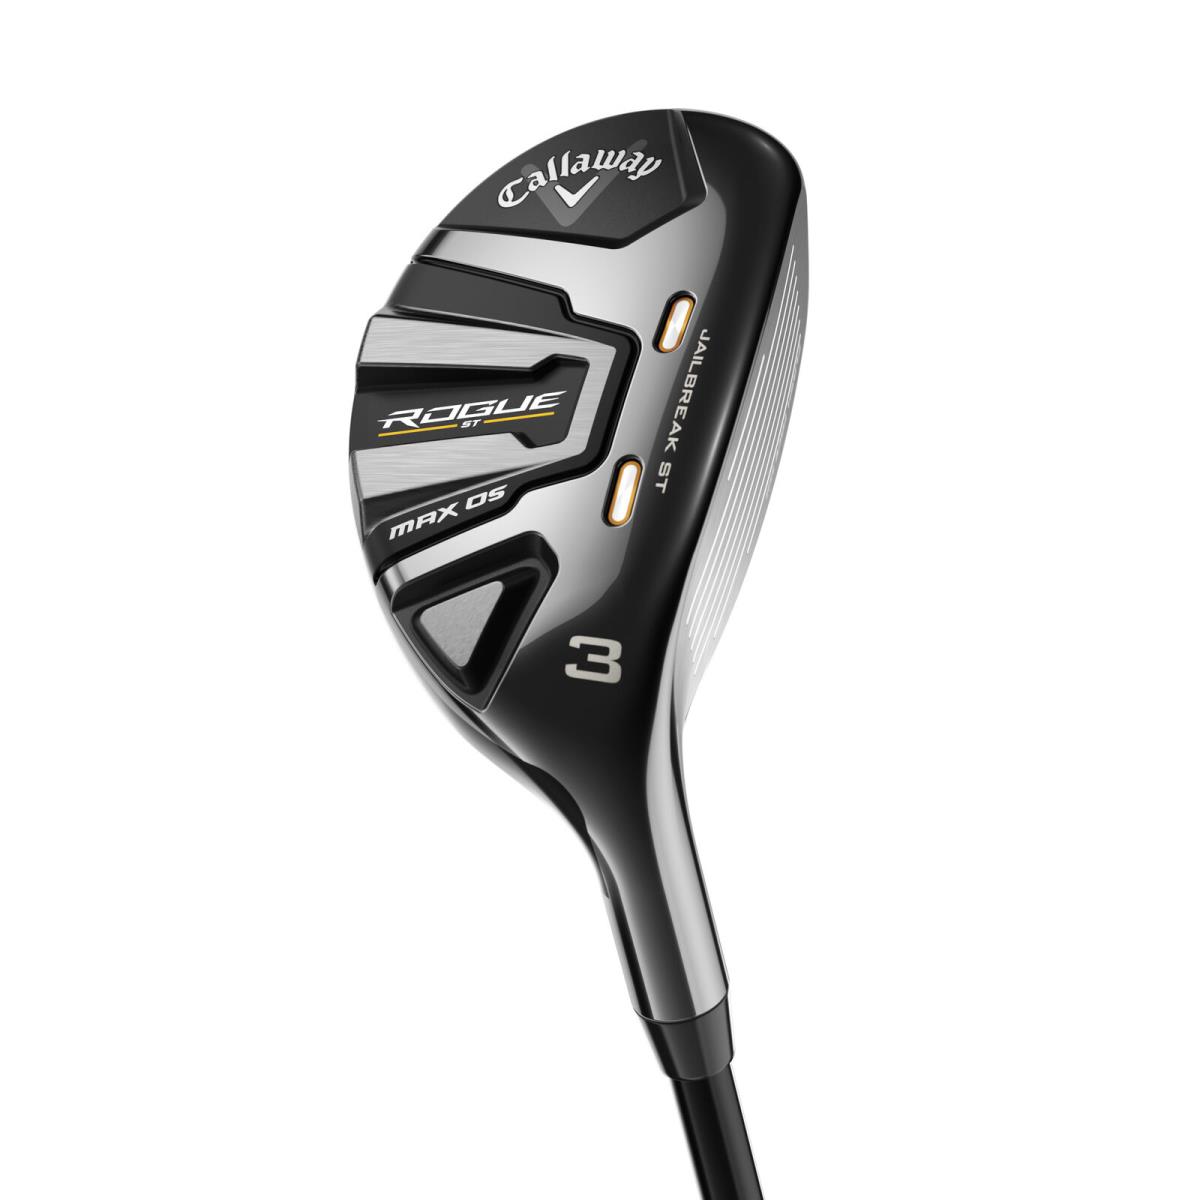 Callaway Rogue ST Max OS Hybrid Options Available